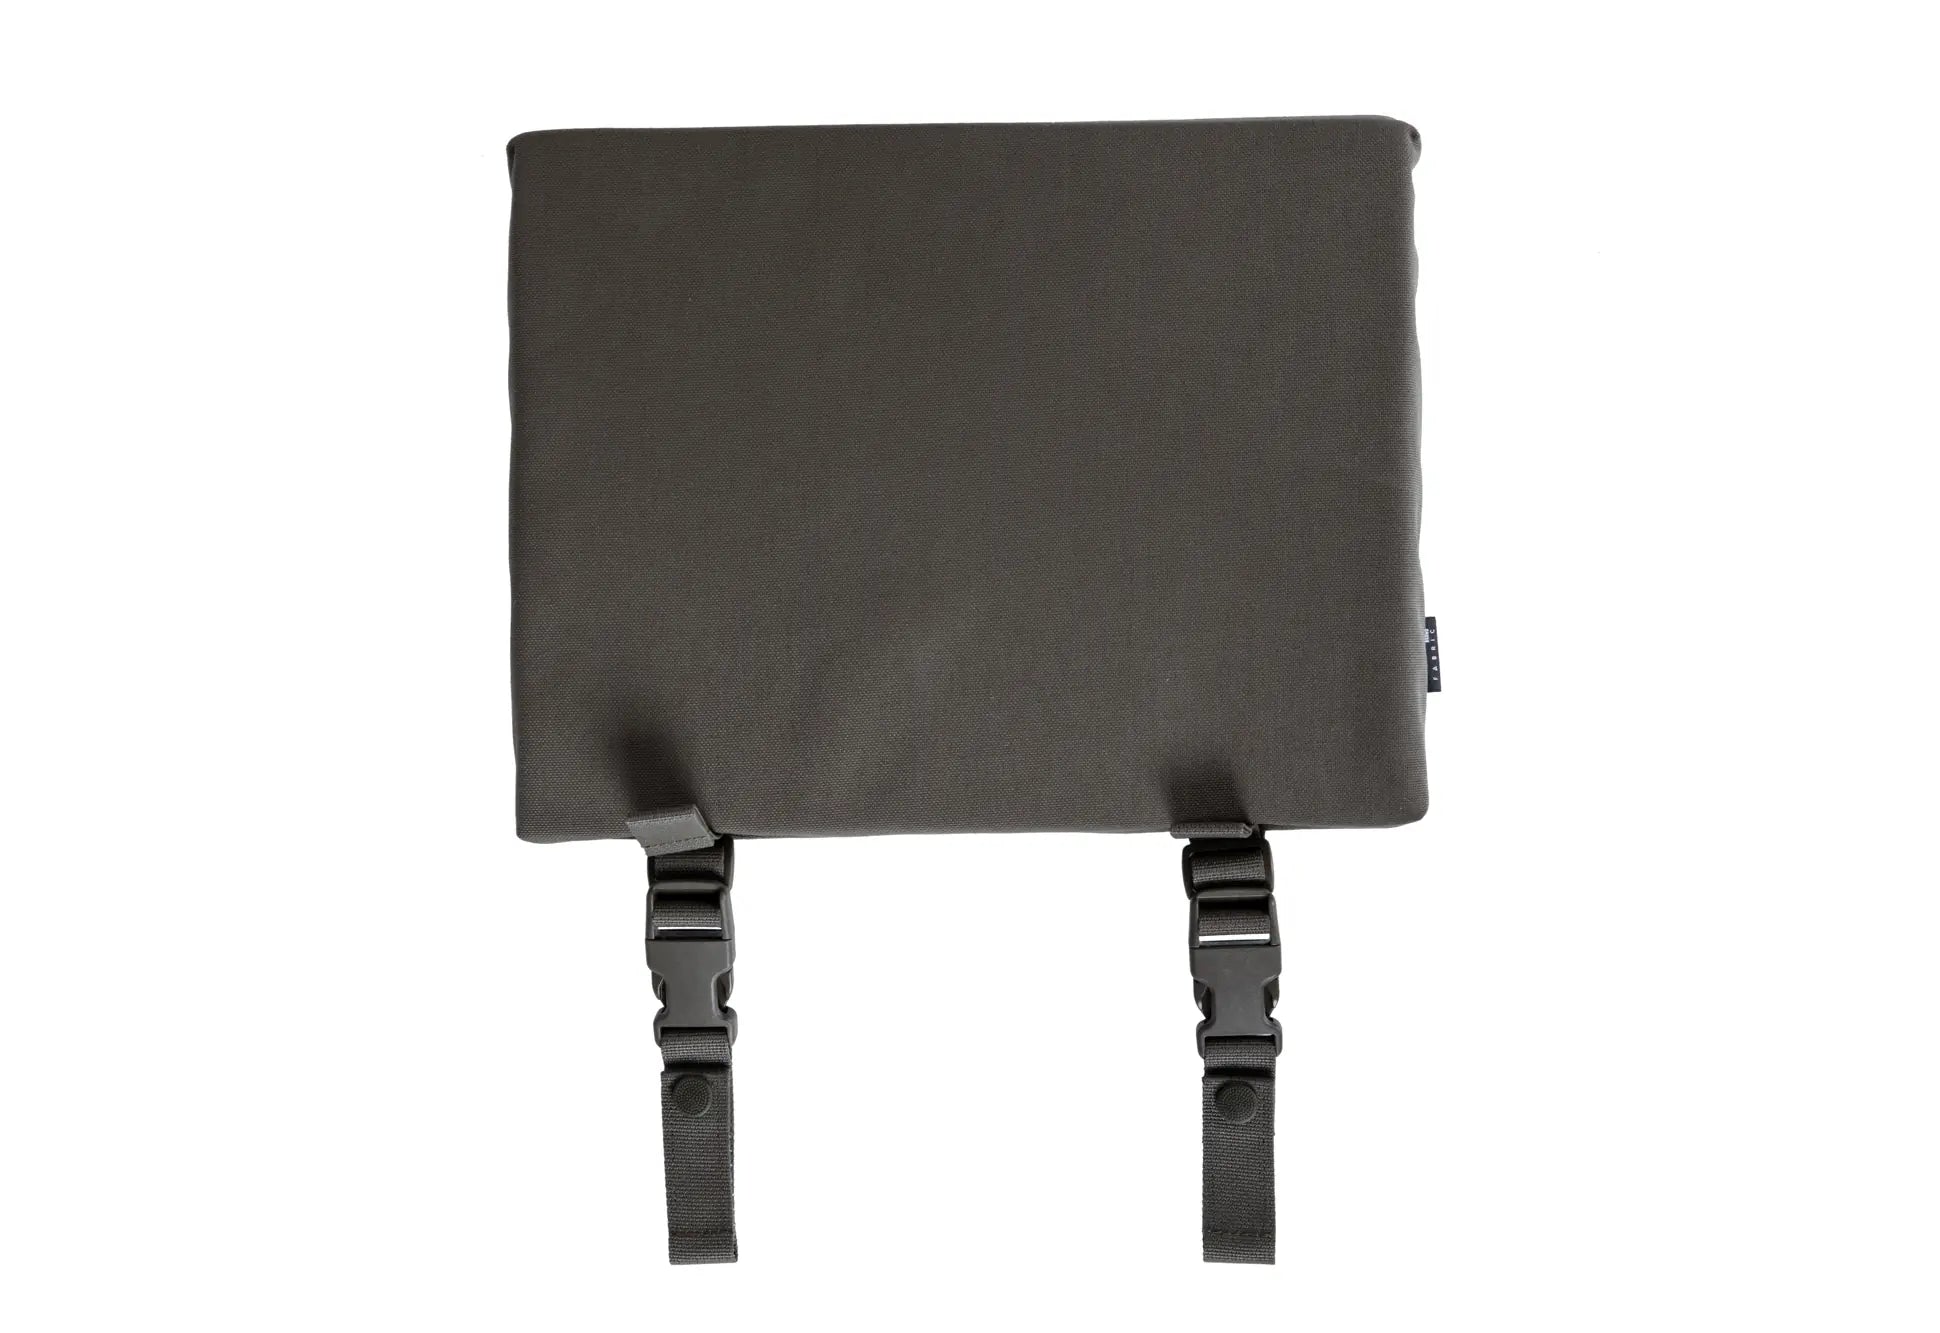 ARMOR Ranger Green Seat Mat with Strap Attachment